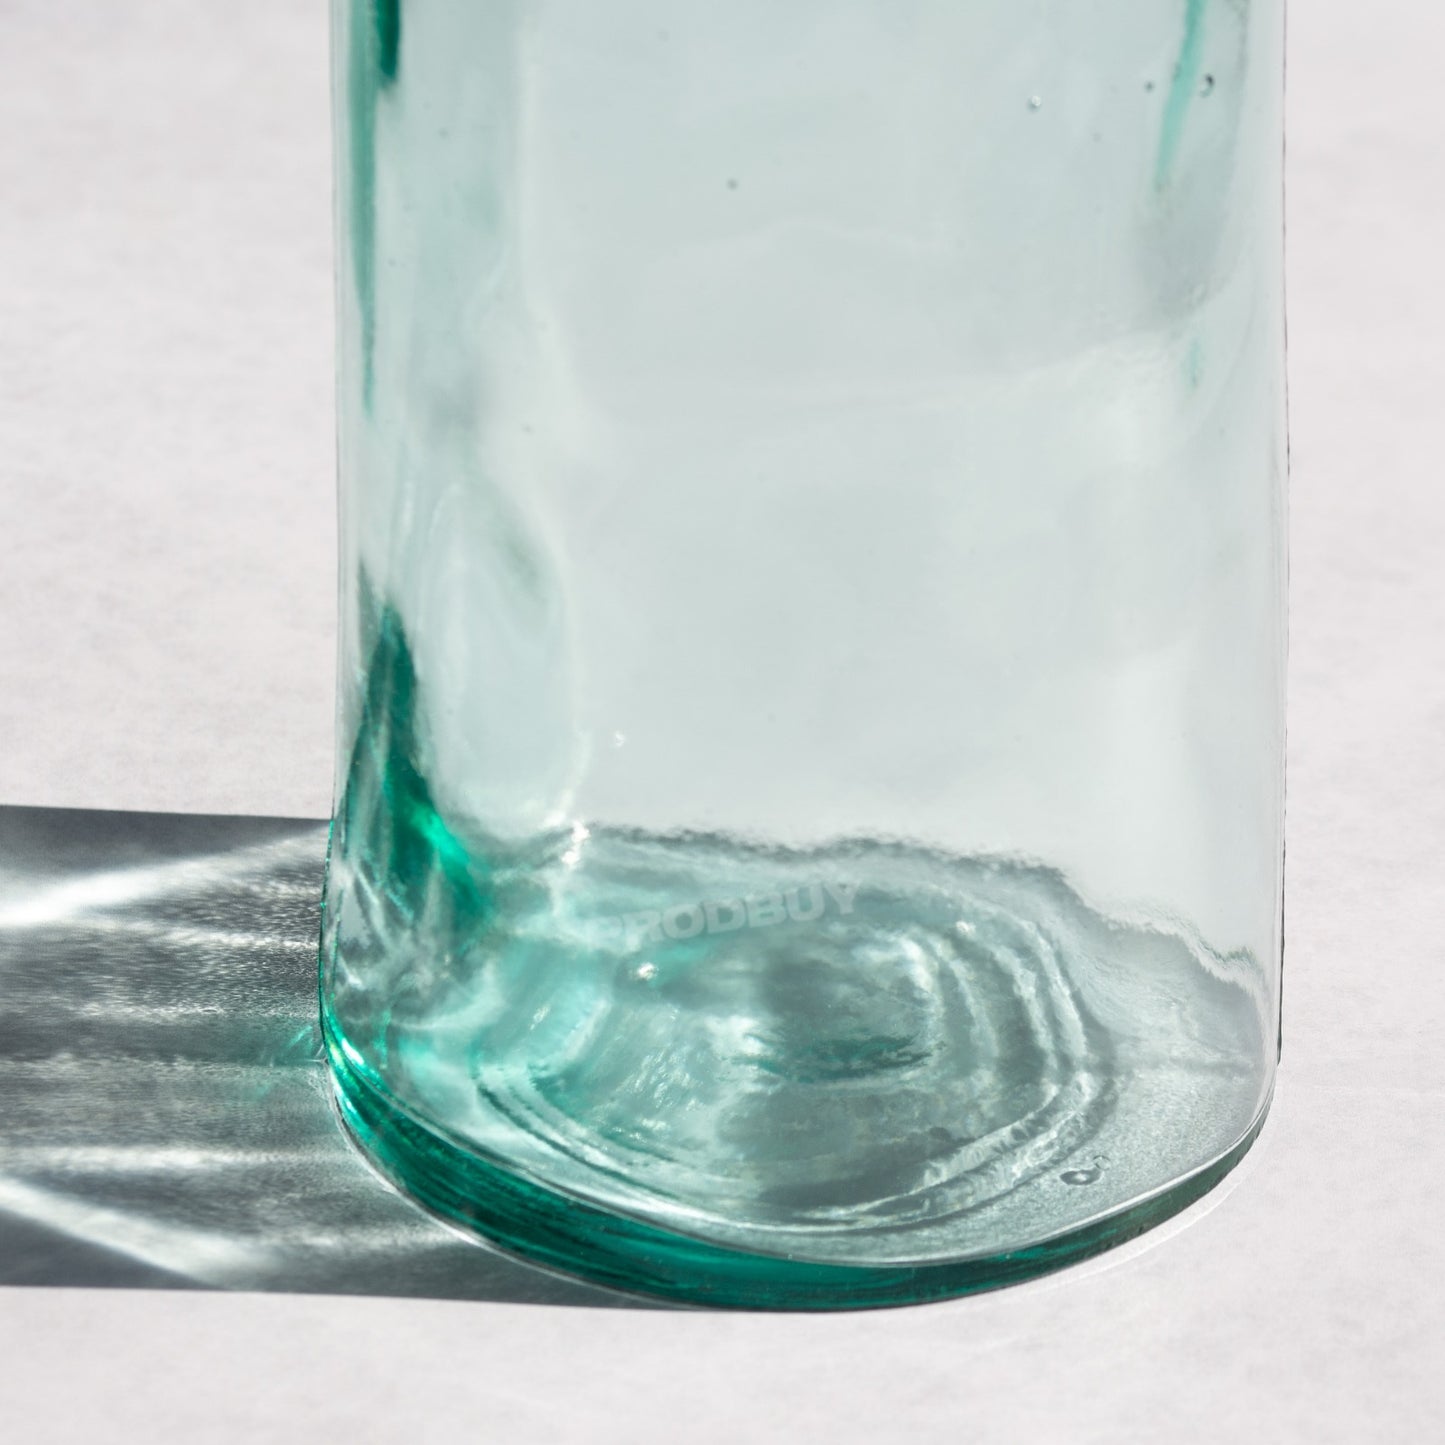 35cm Large Tall Recycled Glass Vase